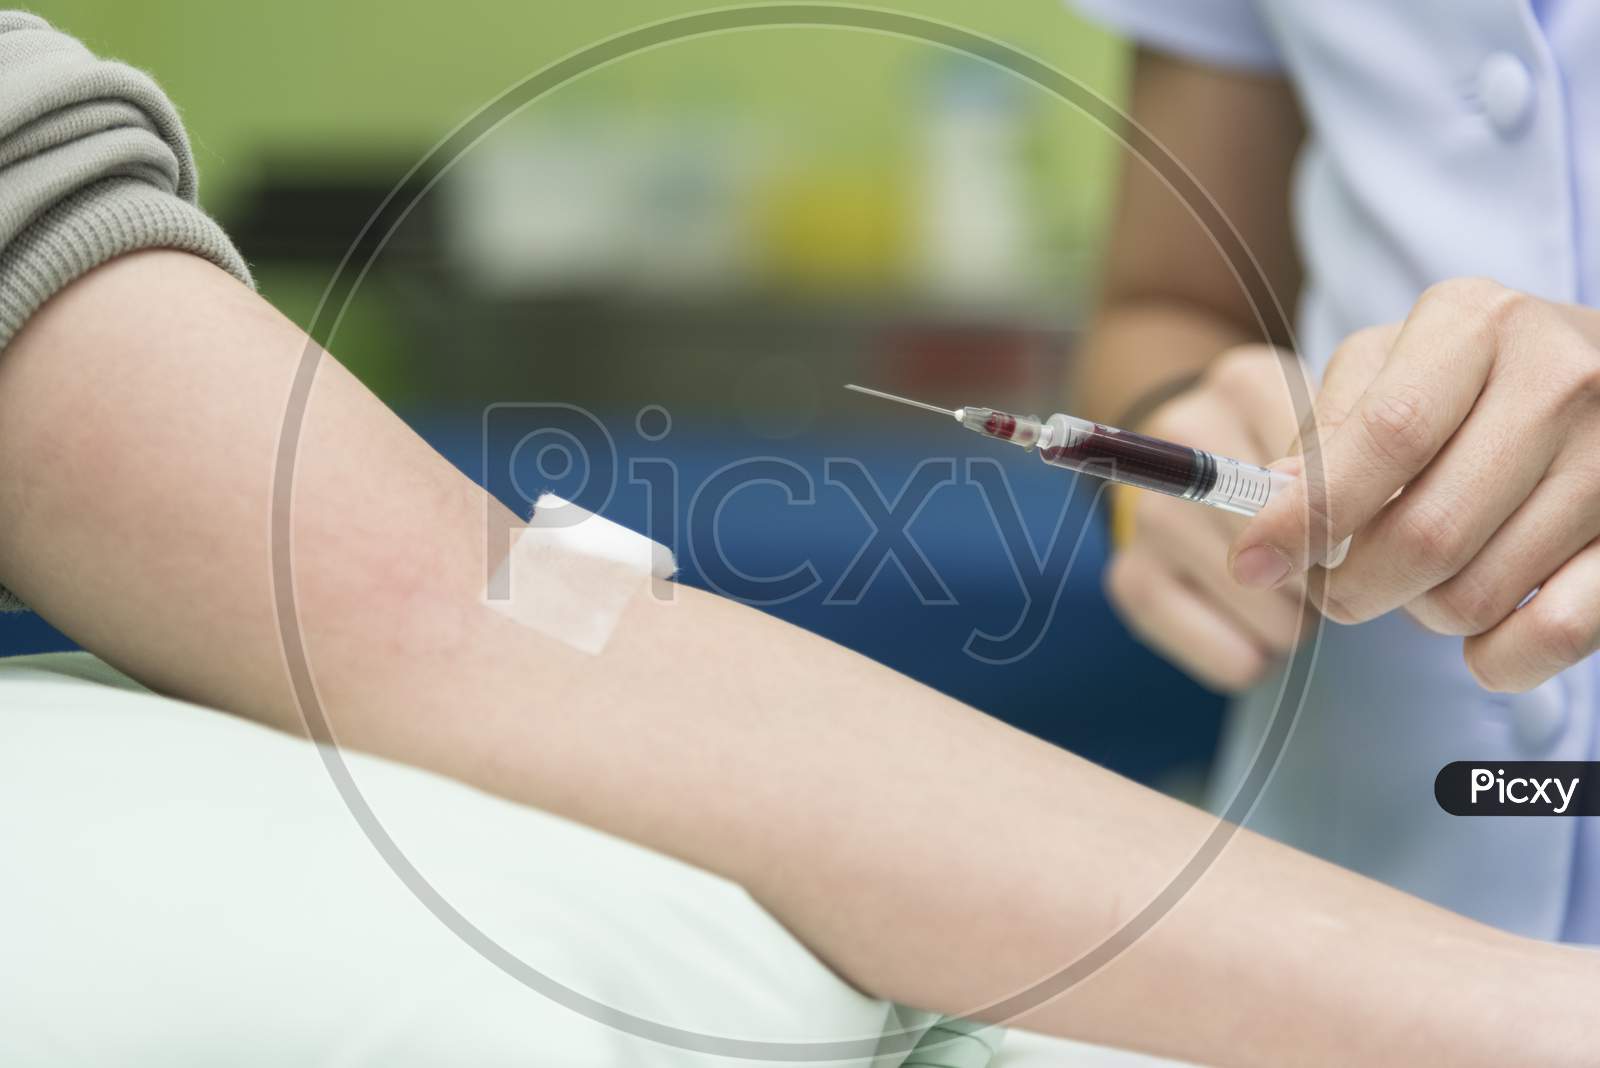 Blood Collect By Nurse In The Hospital, Blood Test Examination And Donate Concept. Hospital And Health Care Concept